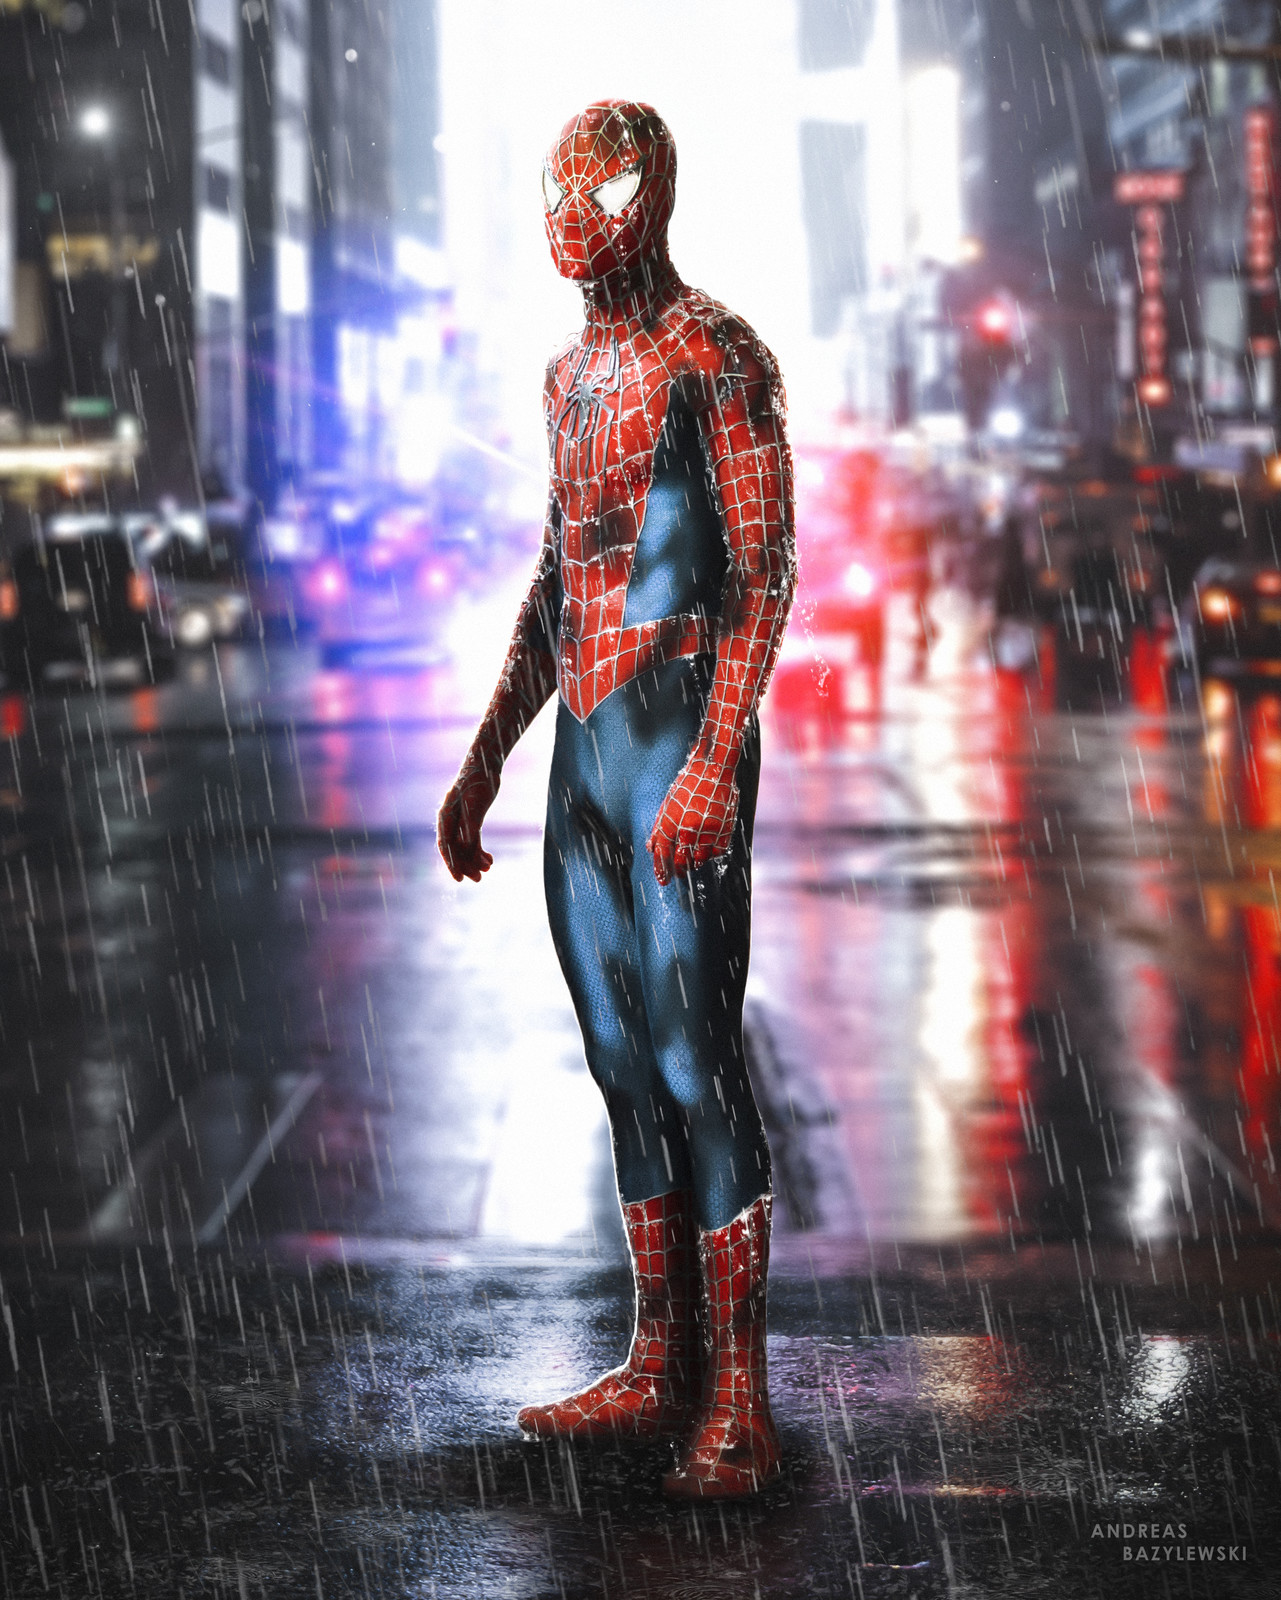 Spider-Man standing in rain (final result, cropped)